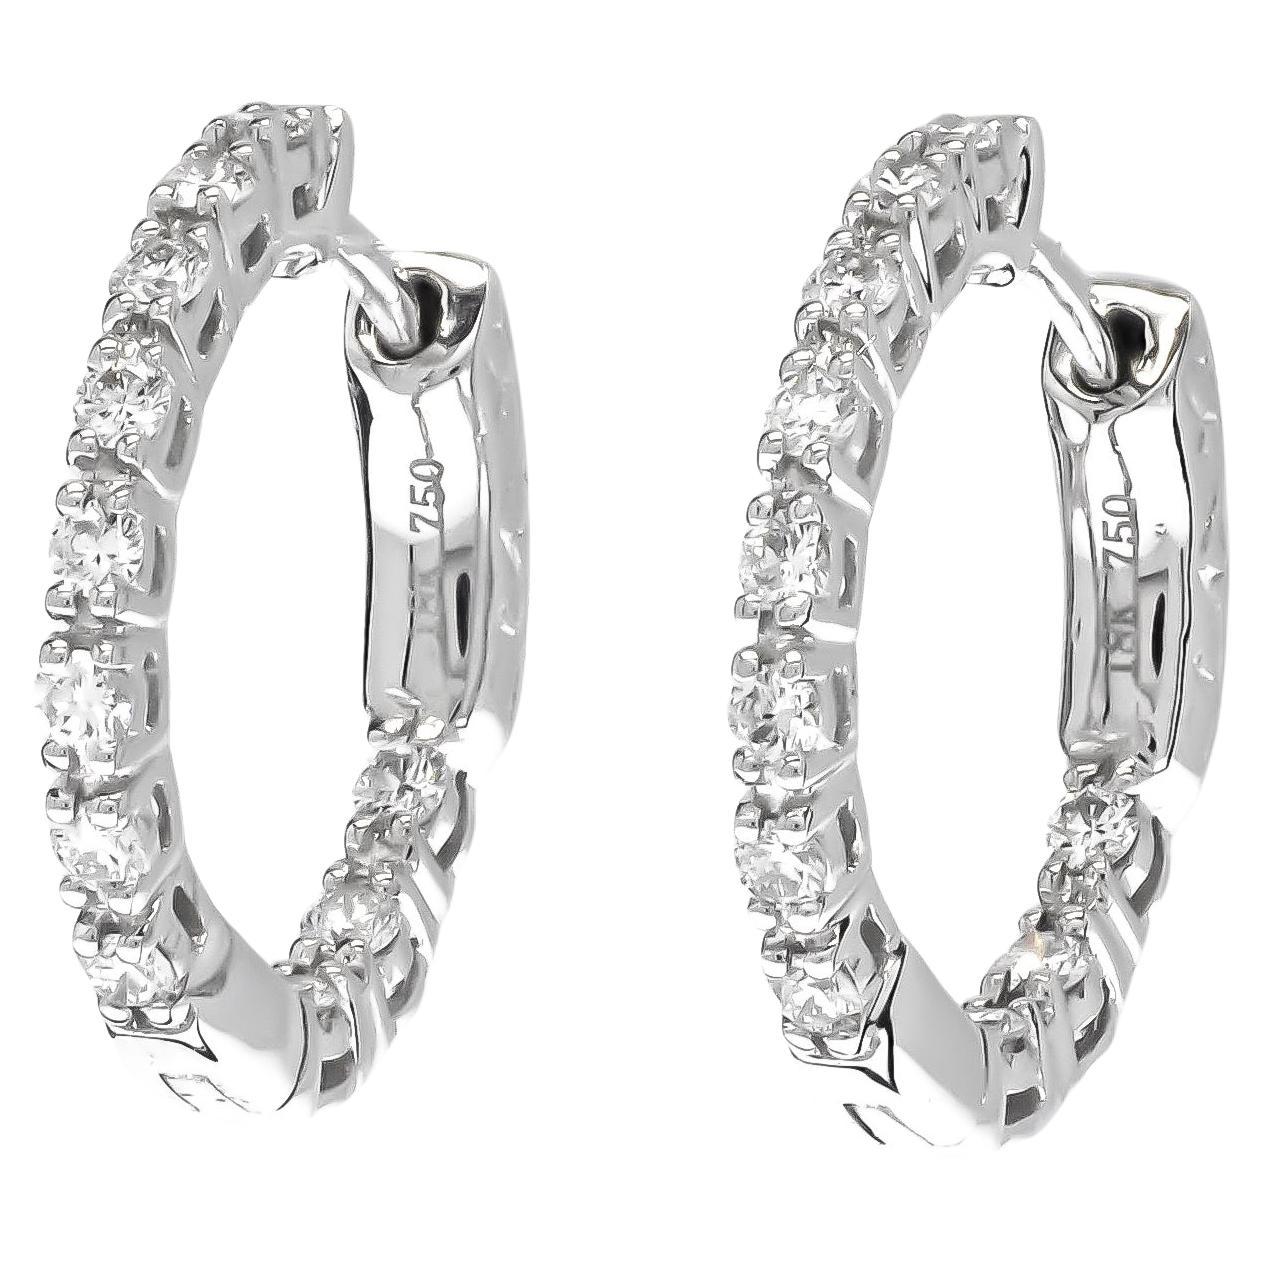 Natural Diamond 0.55 carats 18KT White Gold 'in and out' petite Hoop Earrings 